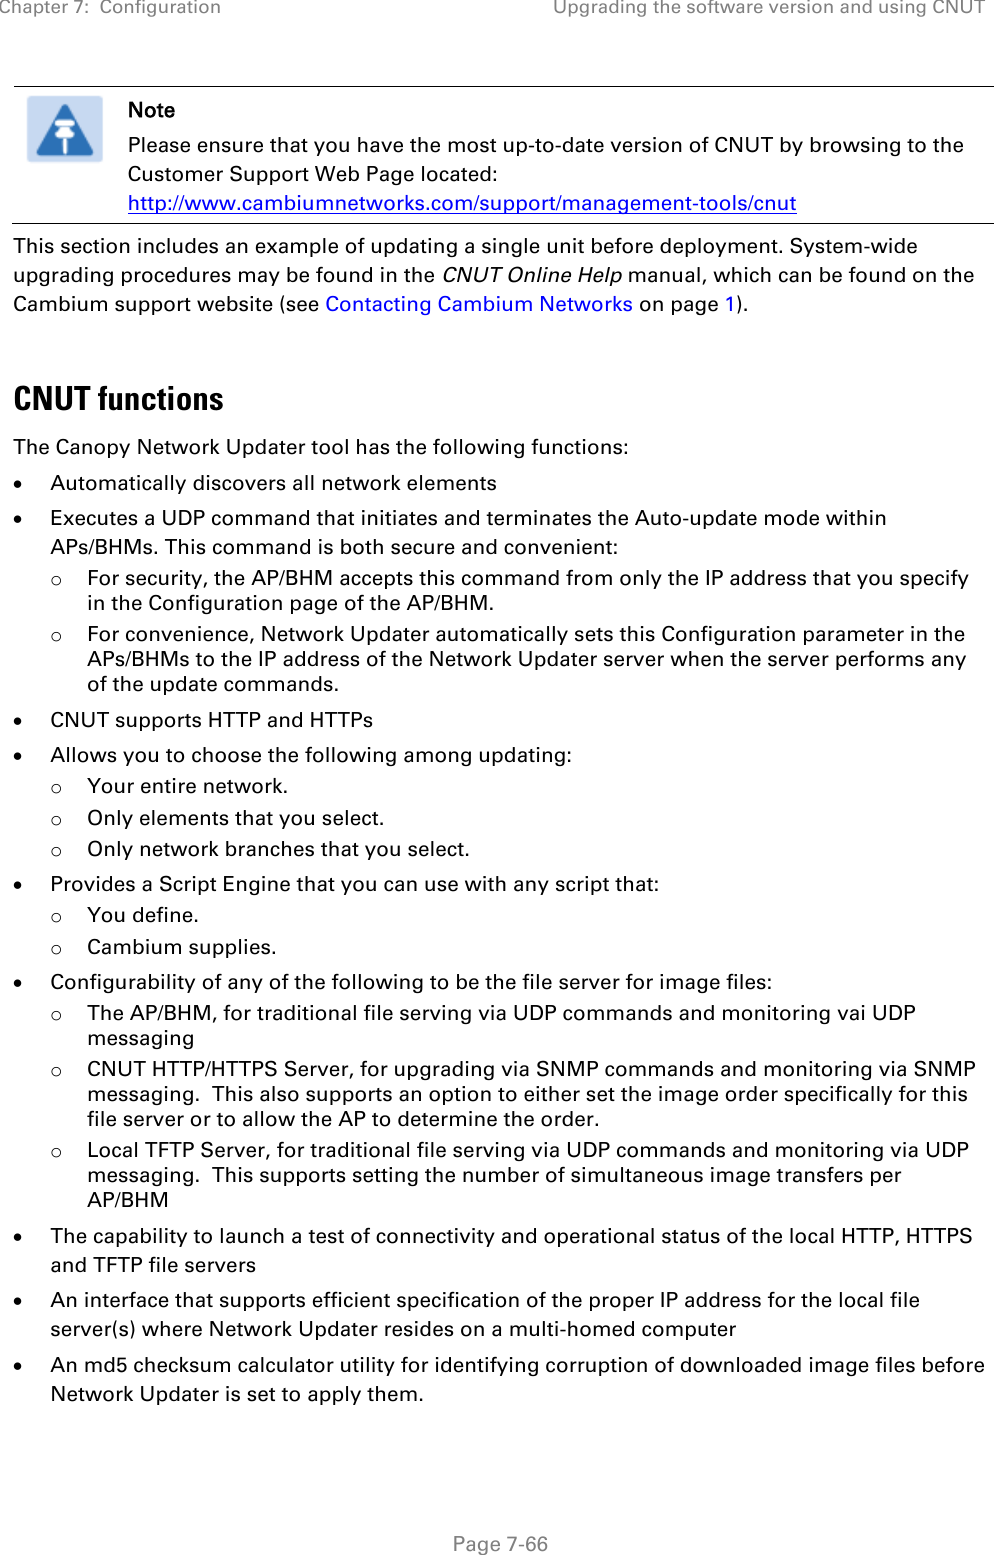 Chapter 7:  Configuration Upgrading the software version and using CNUT   Page 7-66  Note Please ensure that you have the most up-to-date version of CNUT by browsing to the Customer Support Web Page located: http://www.cambiumnetworks.com/support/management-tools/cnut This section includes an example of updating a single unit before deployment. System-wide upgrading procedures may be found in the CNUT Online Help manual, which can be found on the Cambium support website (see Contacting Cambium Networks on page 1).  CNUT functions The Canopy Network Updater tool has the following functions: • Automatically discovers all network elements • Executes a UDP command that initiates and terminates the Auto-update mode within APs/BHMs. This command is both secure and convenient: o For security, the AP/BHM accepts this command from only the IP address that you specify in the Configuration page of the AP/BHM.  o For convenience, Network Updater automatically sets this Configuration parameter in the APs/BHMs to the IP address of the Network Updater server when the server performs any of the update commands. • CNUT supports HTTP and HTTPs • Allows you to choose the following among updating: o Your entire network. o Only elements that you select. o Only network branches that you select. • Provides a Script Engine that you can use with any script that: o You define. o Cambium supplies. • Configurability of any of the following to be the file server for image files: o The AP/BHM, for traditional file serving via UDP commands and monitoring vai UDP messaging o CNUT HTTP/HTTPS Server, for upgrading via SNMP commands and monitoring via SNMP messaging.  This also supports an option to either set the image order specifically for this file server or to allow the AP to determine the order. o Local TFTP Server, for traditional file serving via UDP commands and monitoring via UDP messaging.  This supports setting the number of simultaneous image transfers per AP/BHM • The capability to launch a test of connectivity and operational status of the local HTTP, HTTPS and TFTP file servers • An interface that supports efficient specification of the proper IP address for the local file server(s) where Network Updater resides on a multi-homed computer • An md5 checksum calculator utility for identifying corruption of downloaded image files before Network Updater is set to apply them. 